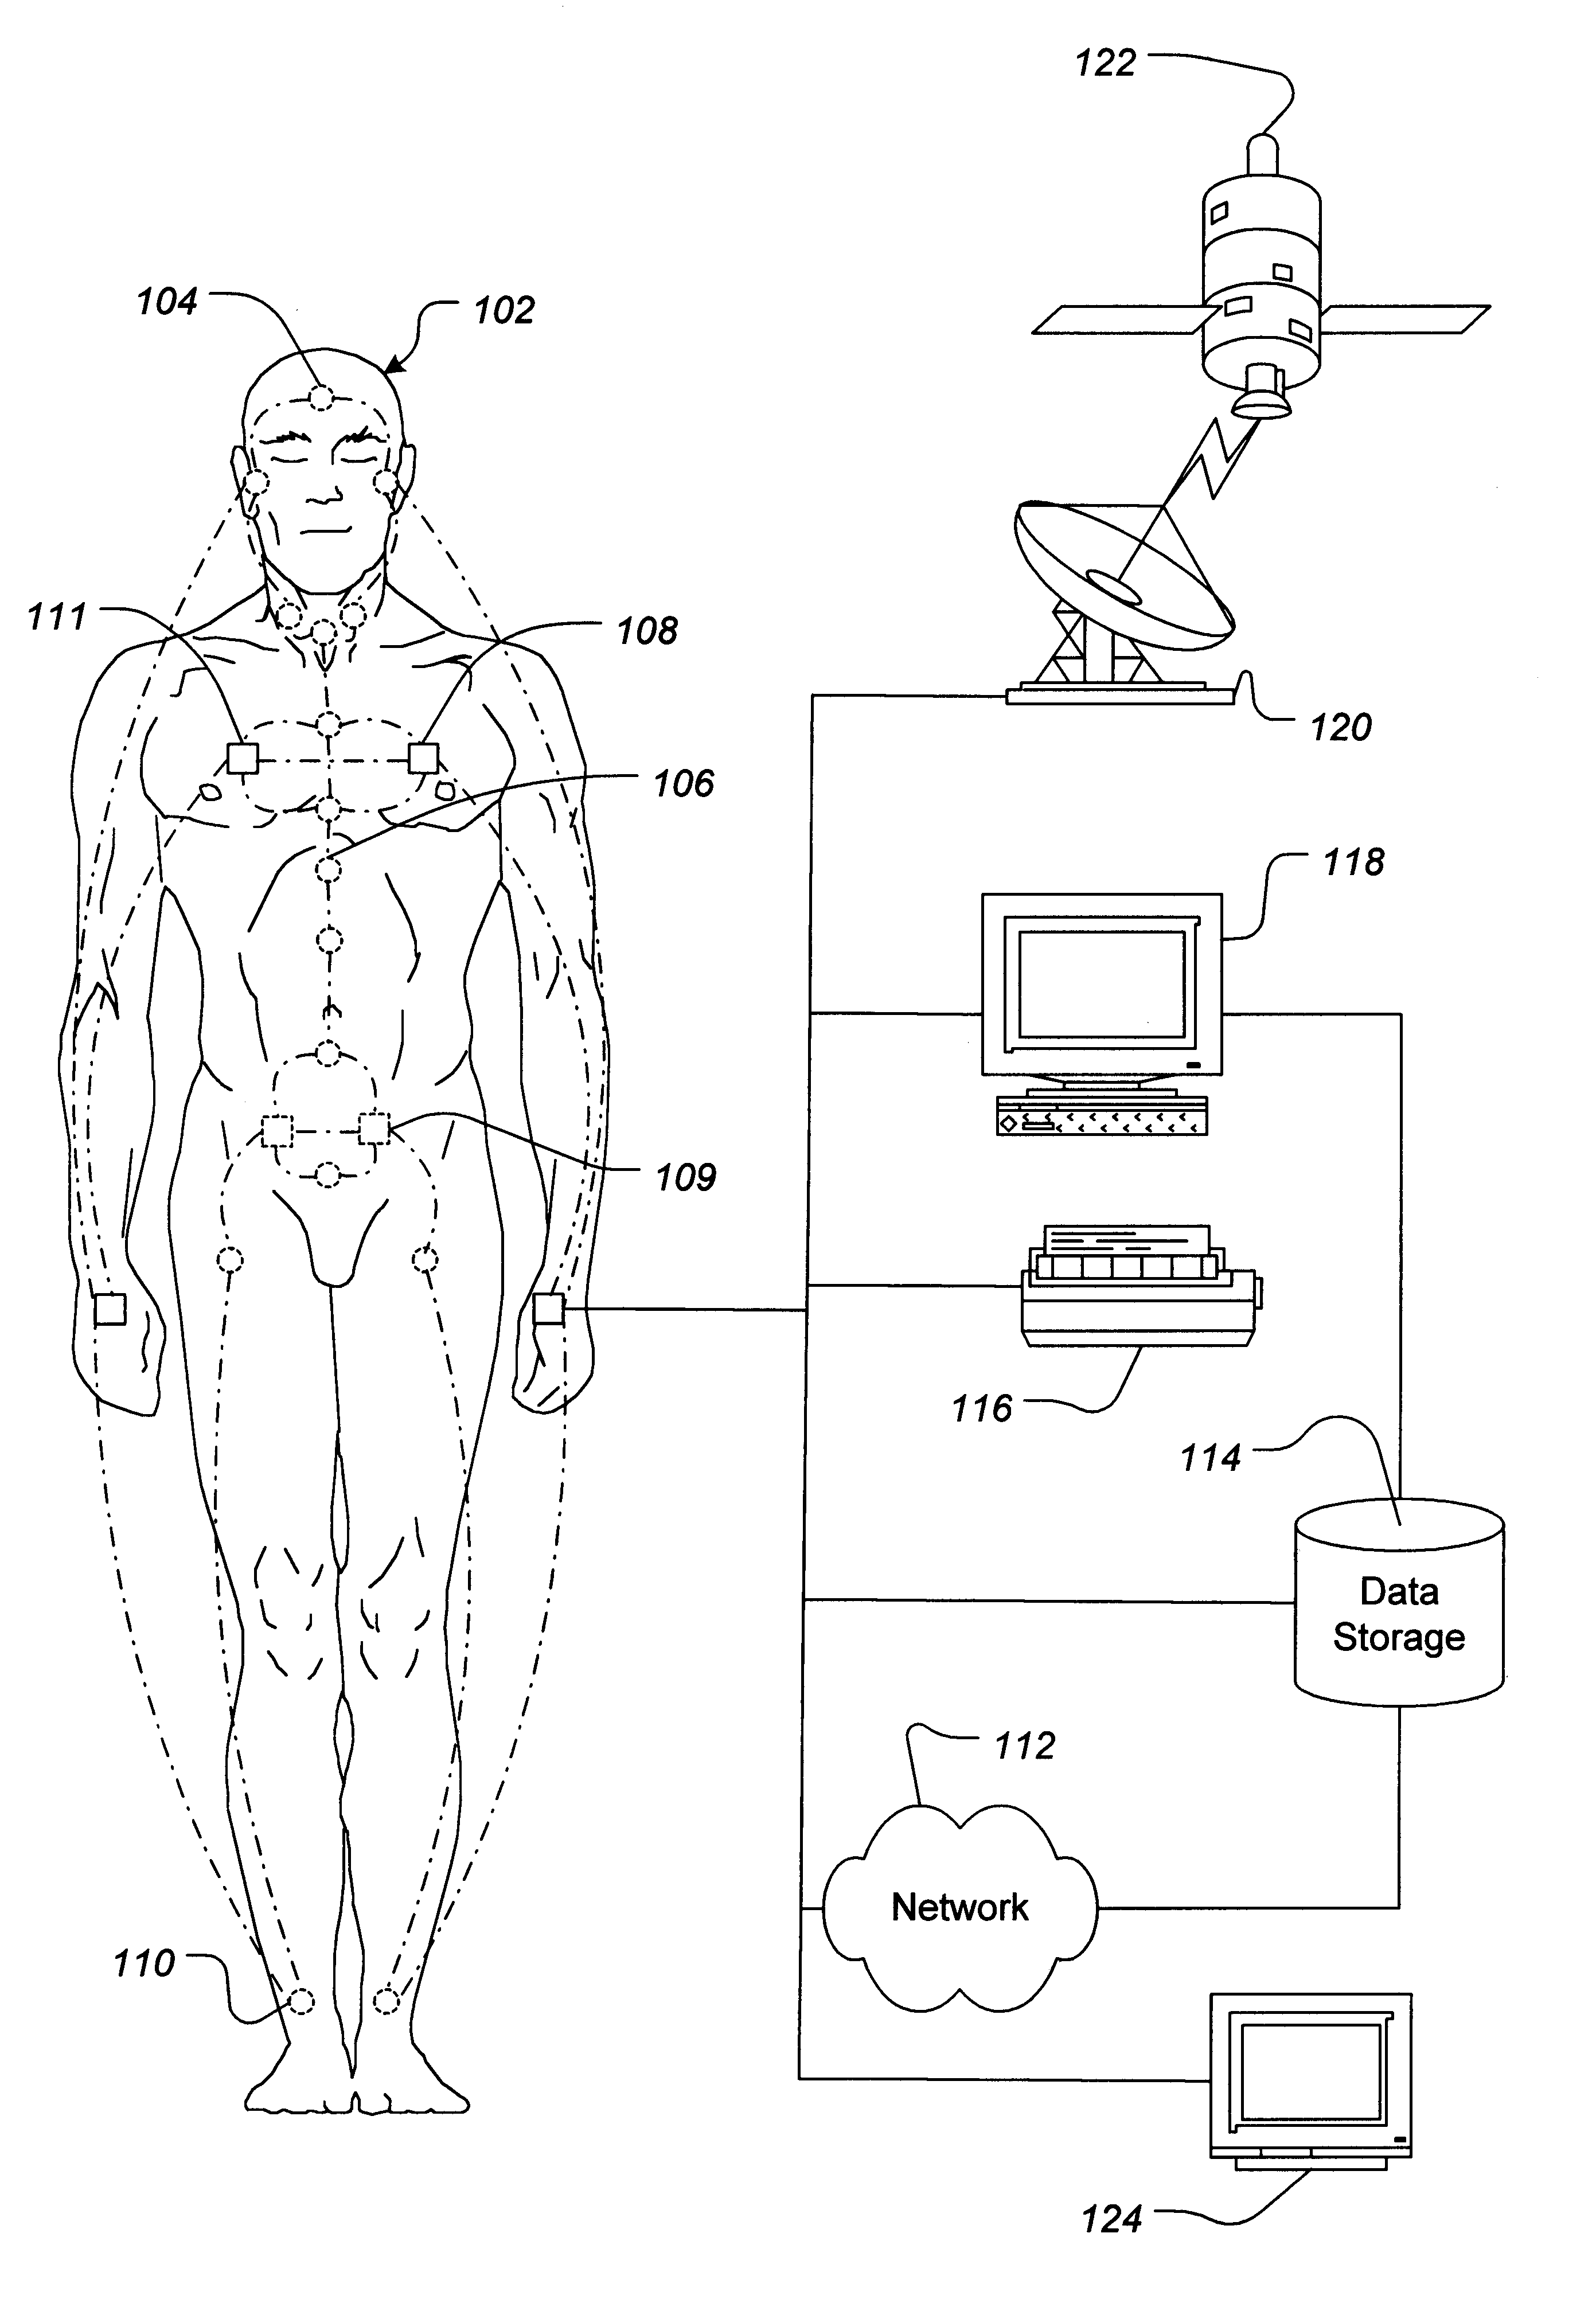 Network for implanted computer devices